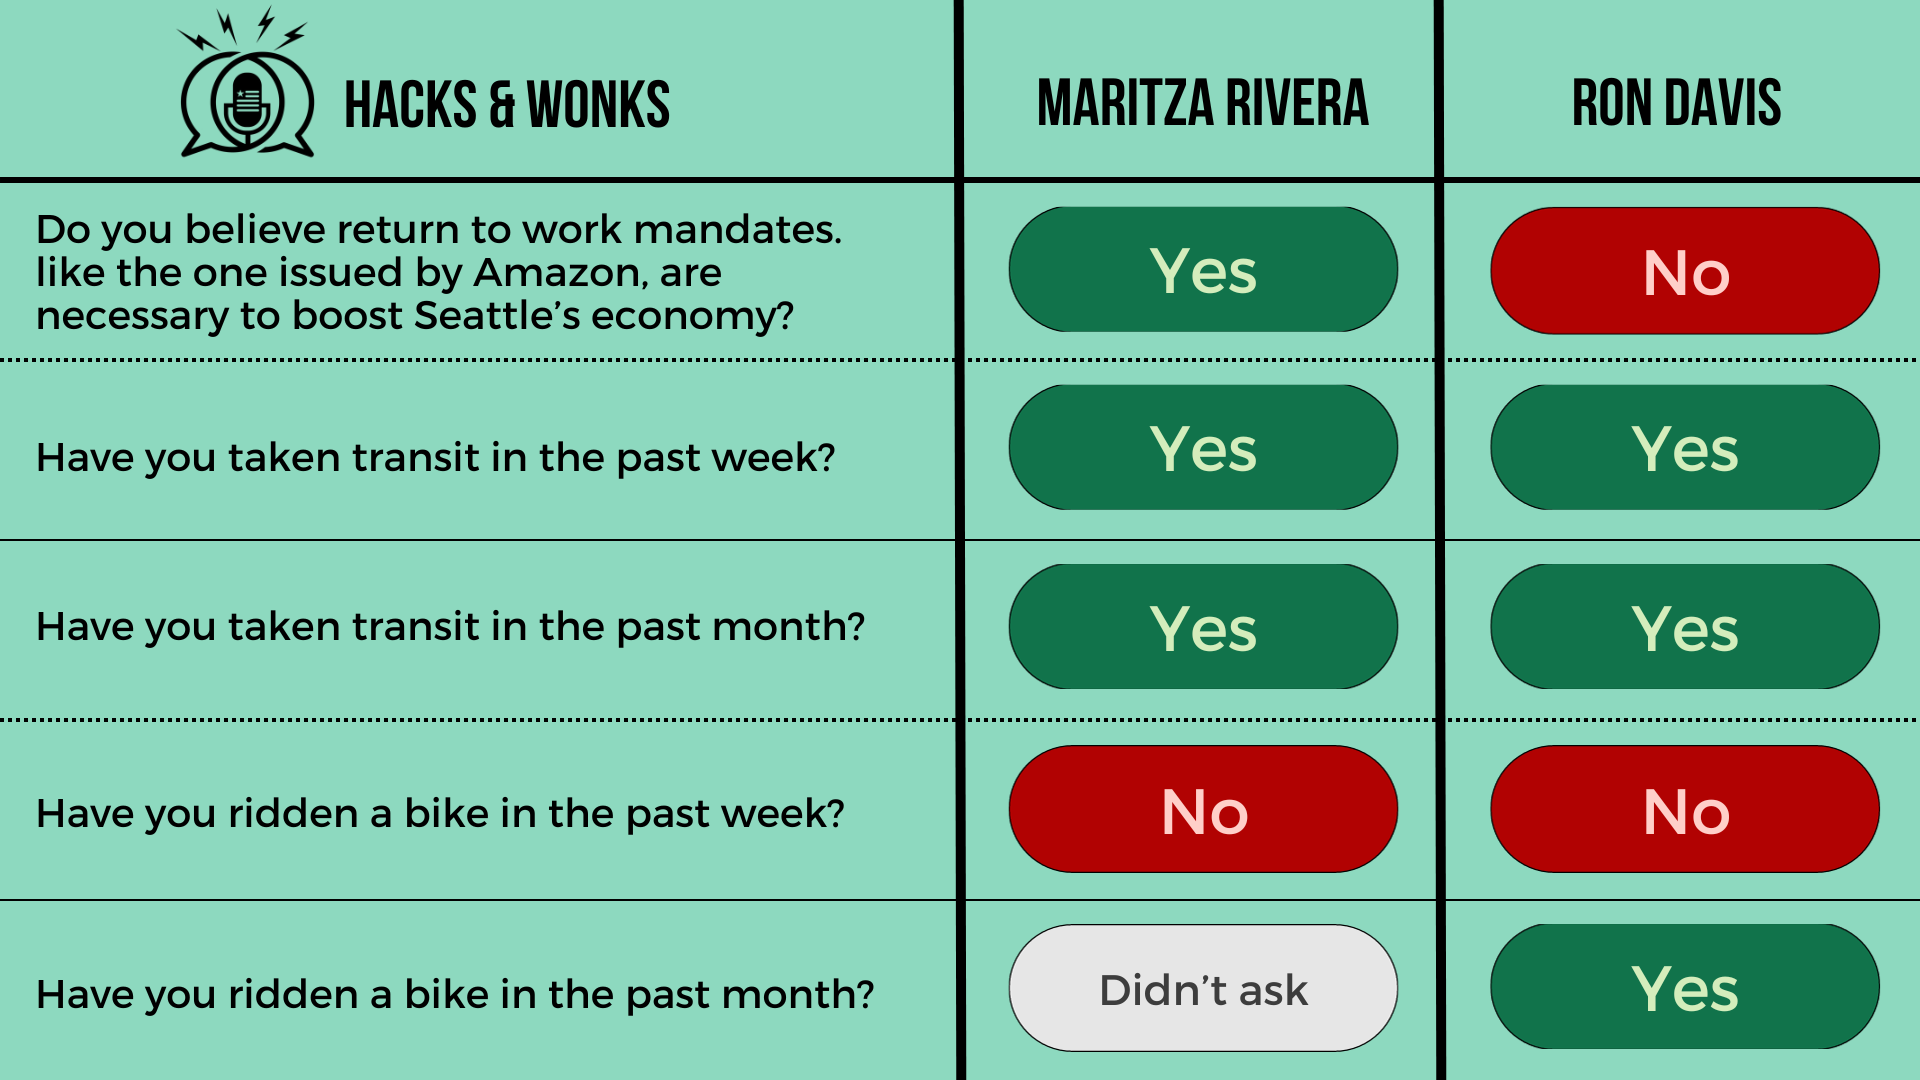 Q: Do you believe return to work mandates. like the one issued by Amazon, are necessary to boost Seattle’s economy? Maritza Rivera: Yes, Ron Davis: No  Q: Have you taken transit in the past week? Maritza Rivera: Yes, Ron Davis: Yes  Q: Have you taken